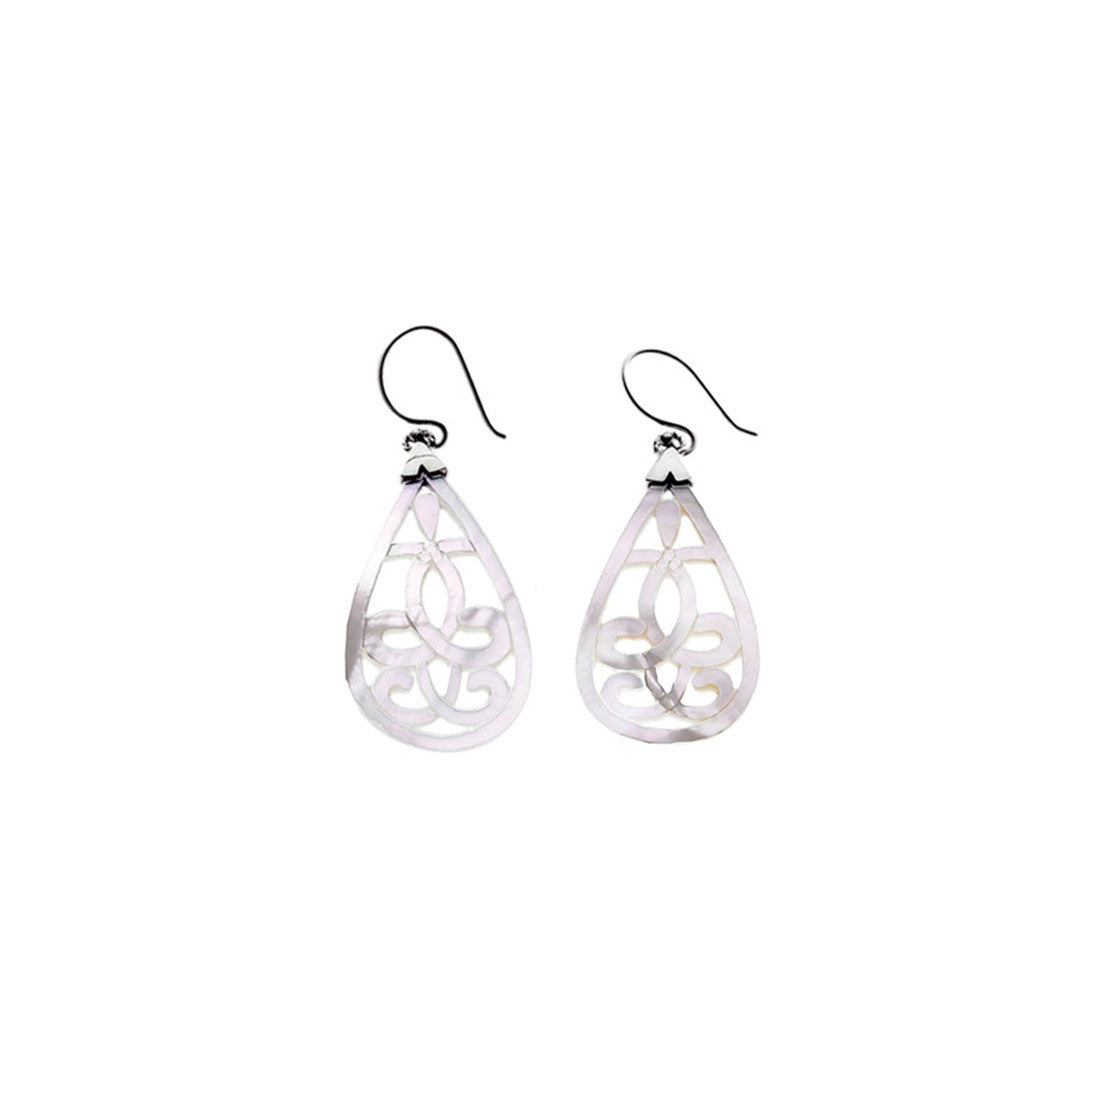 Love Letters Sterling Silver Mother Of Pearl Teardrop Earring - Cynthia Gale New York Jewelry